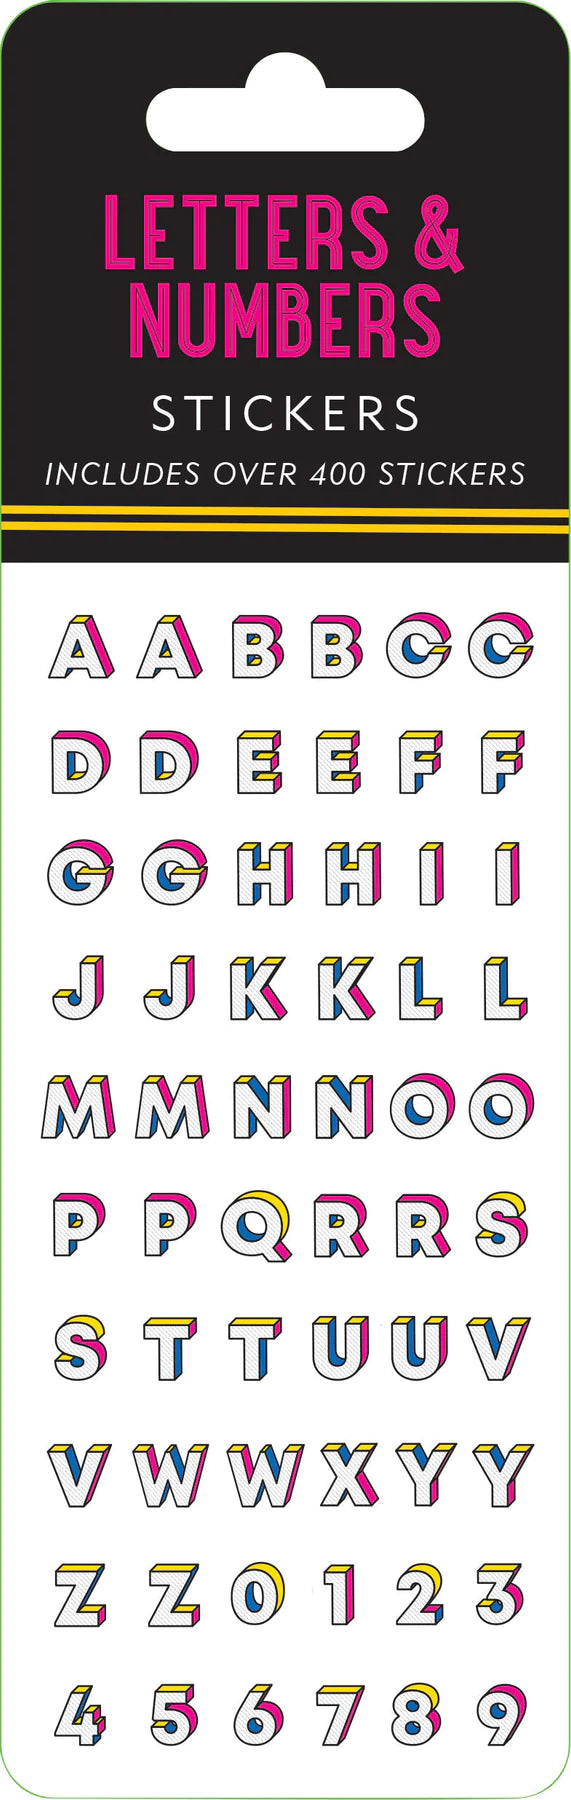 Letters & Numbers Stickers - West Side Kids Inc